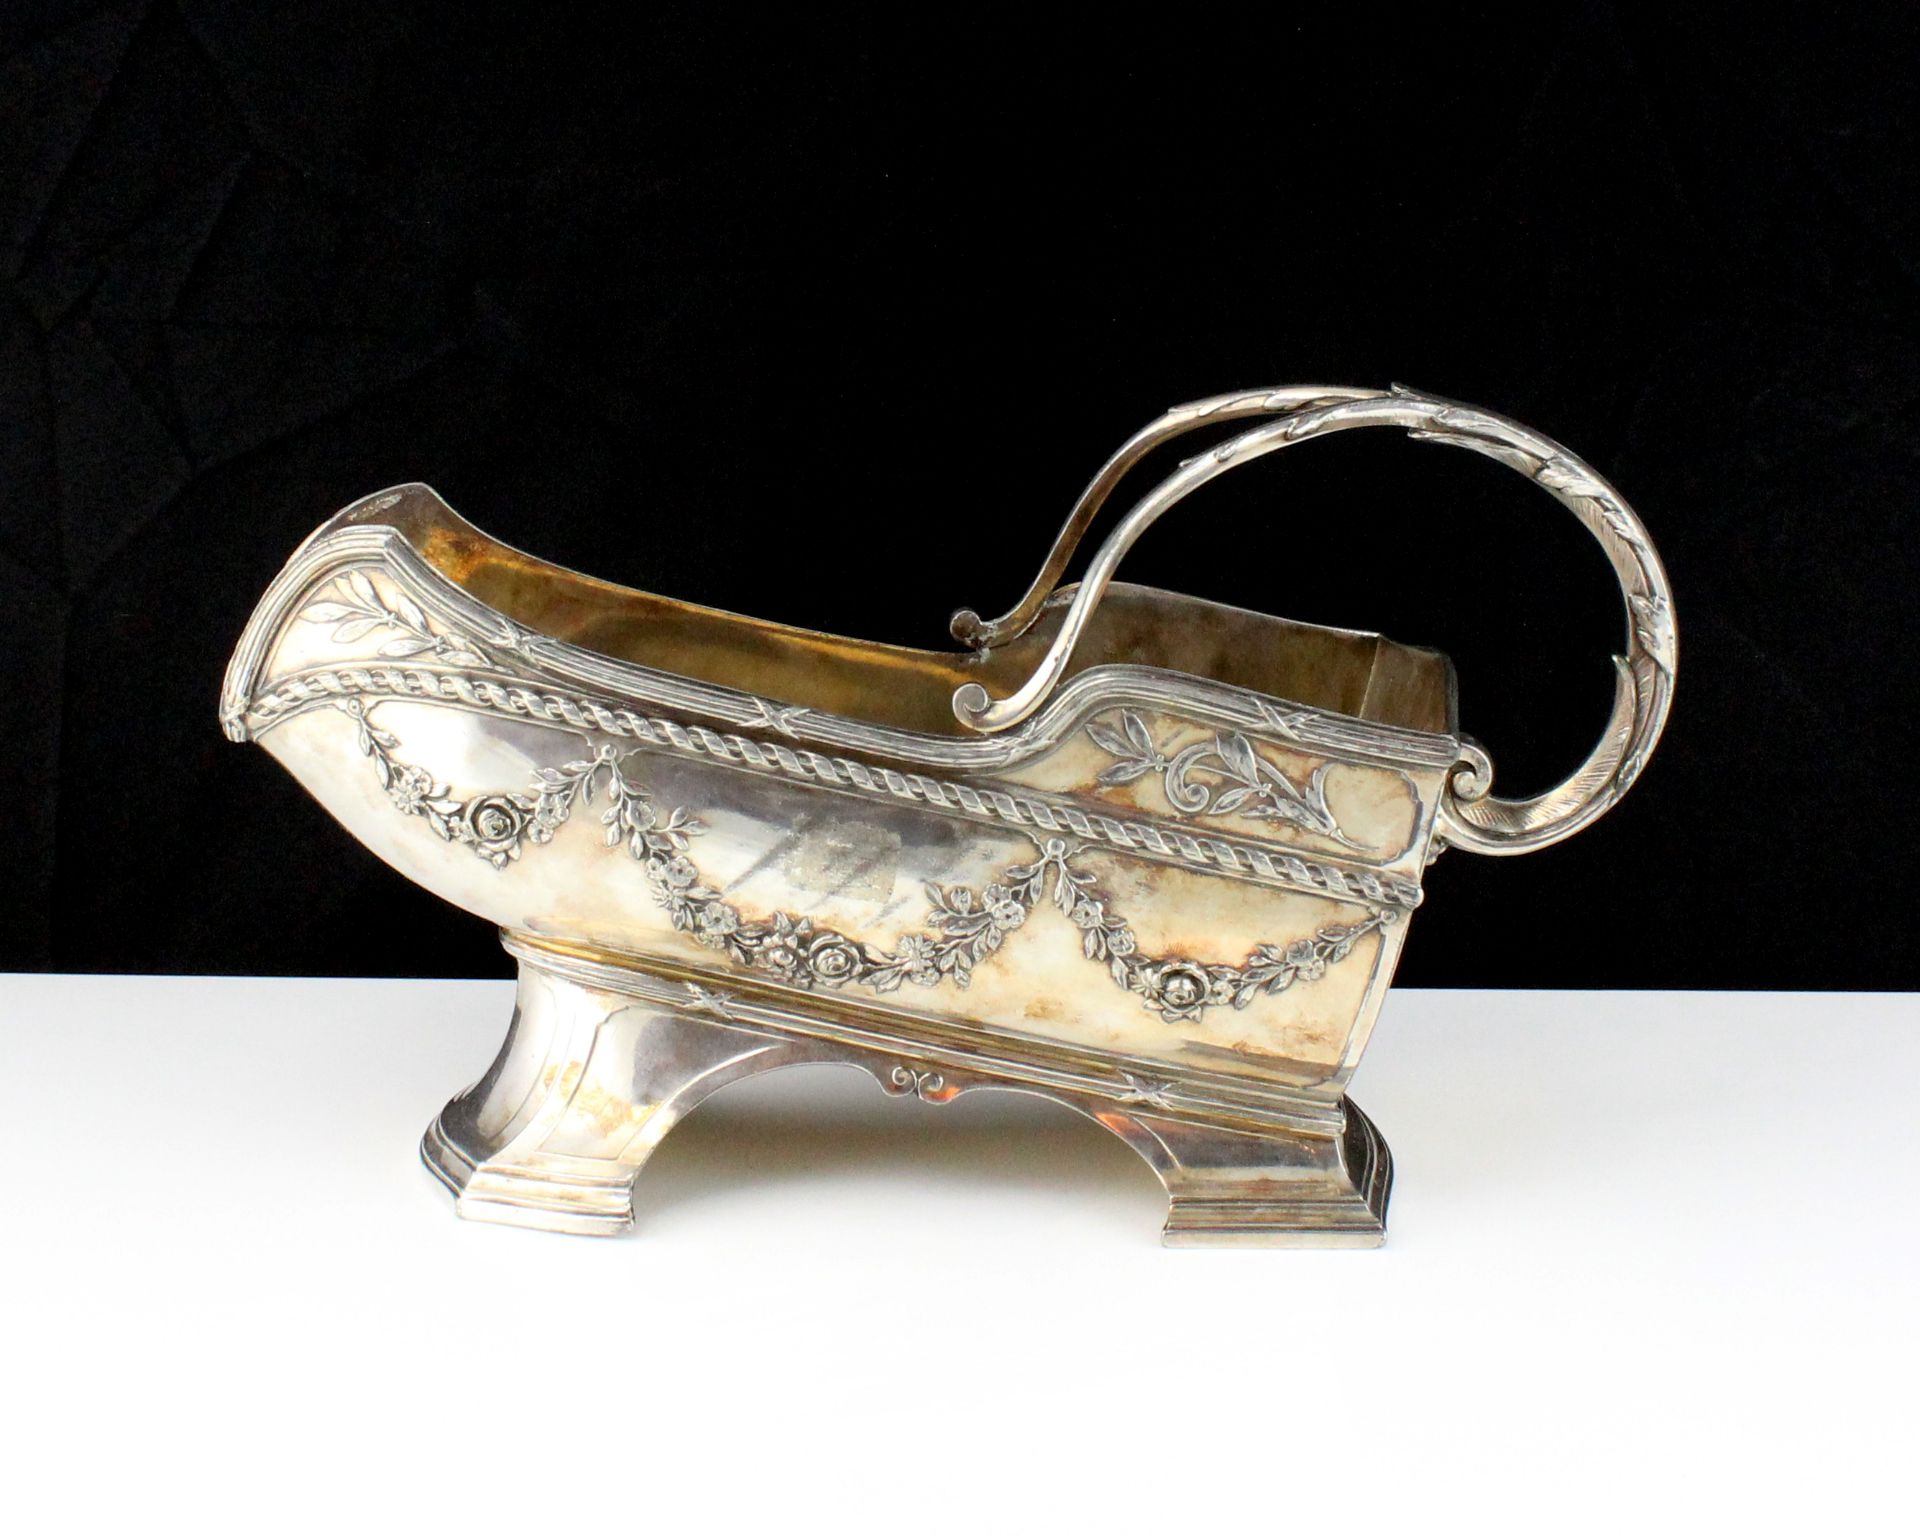 A French silver plated wine bottle holder, decorated with bound reeds and swags / garlands, with